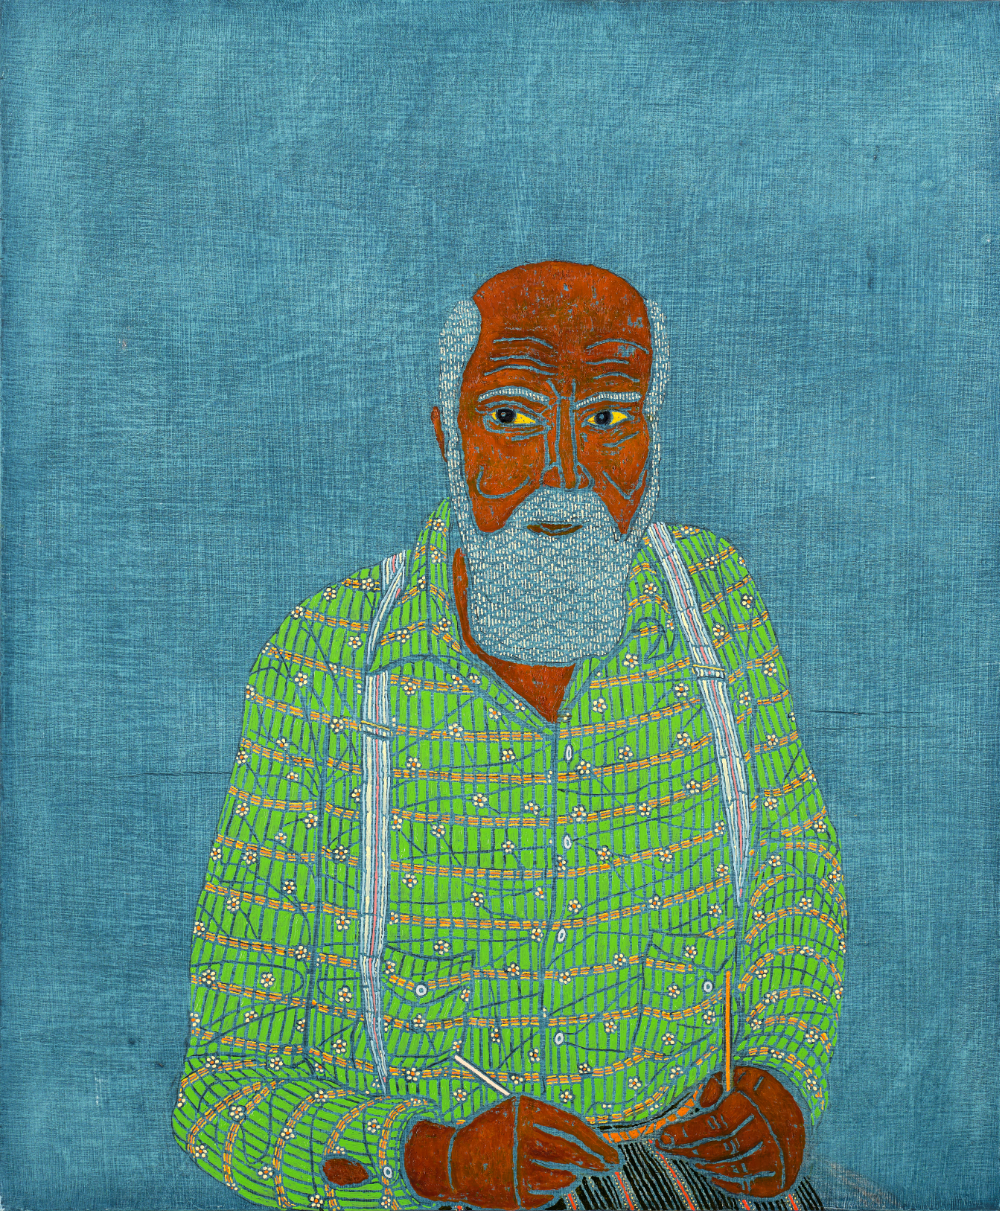 The Outliers (Portrait of Bill Traylor), 58 x 48 cm, Oil on Panel, 2022, Private Collection